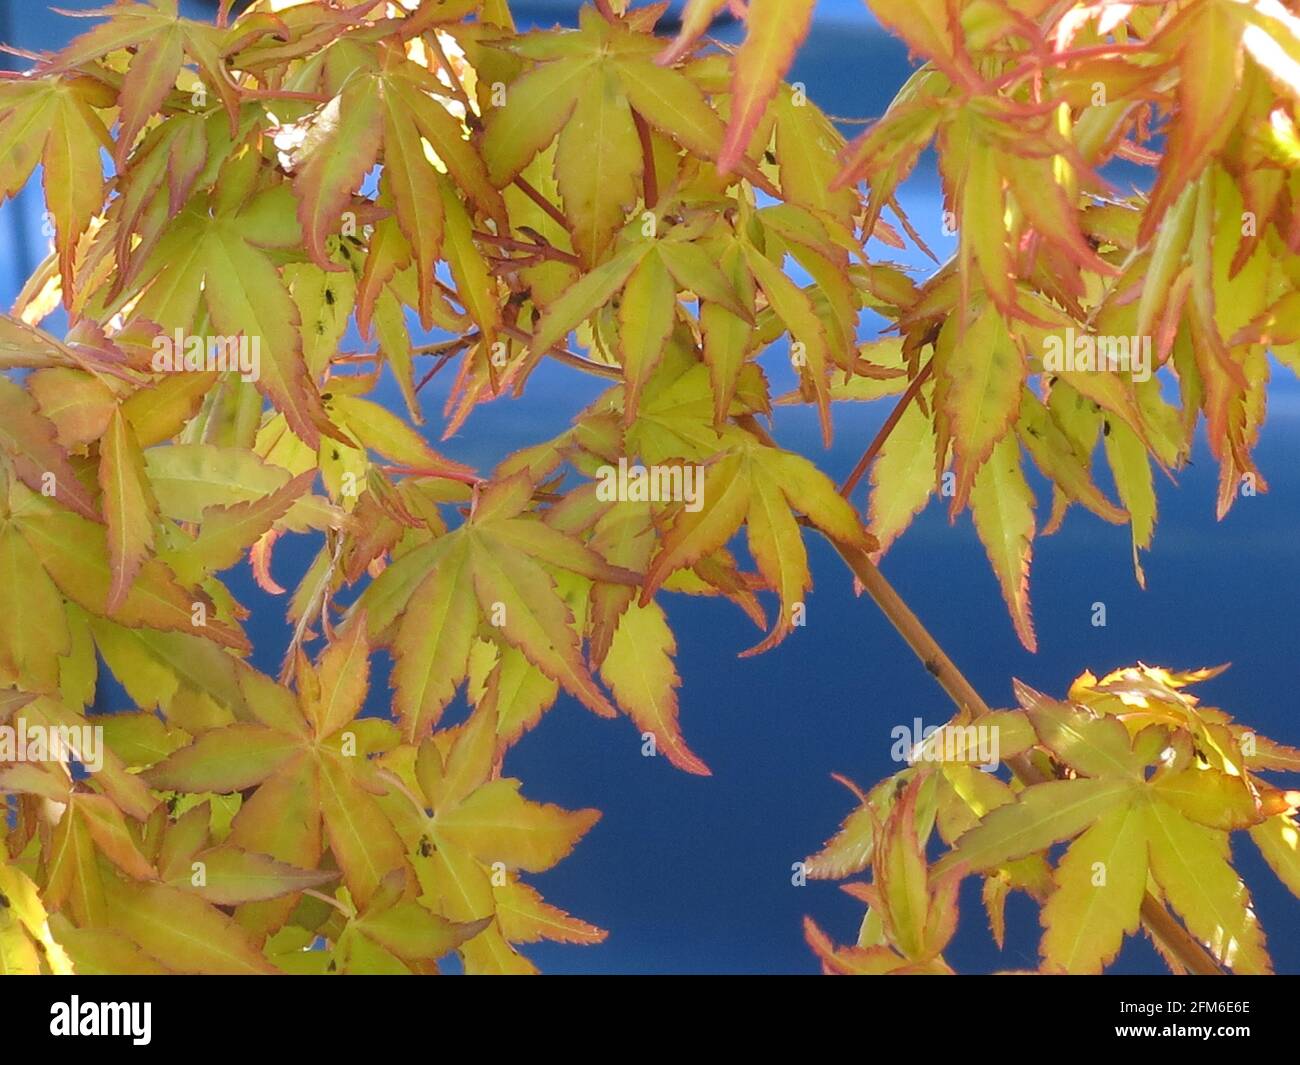 Close-up of the foliage of Acer palmatum (Mizuho beni) with small green leaves edged in red looking almost golden against a royal blue car. Stock Photo